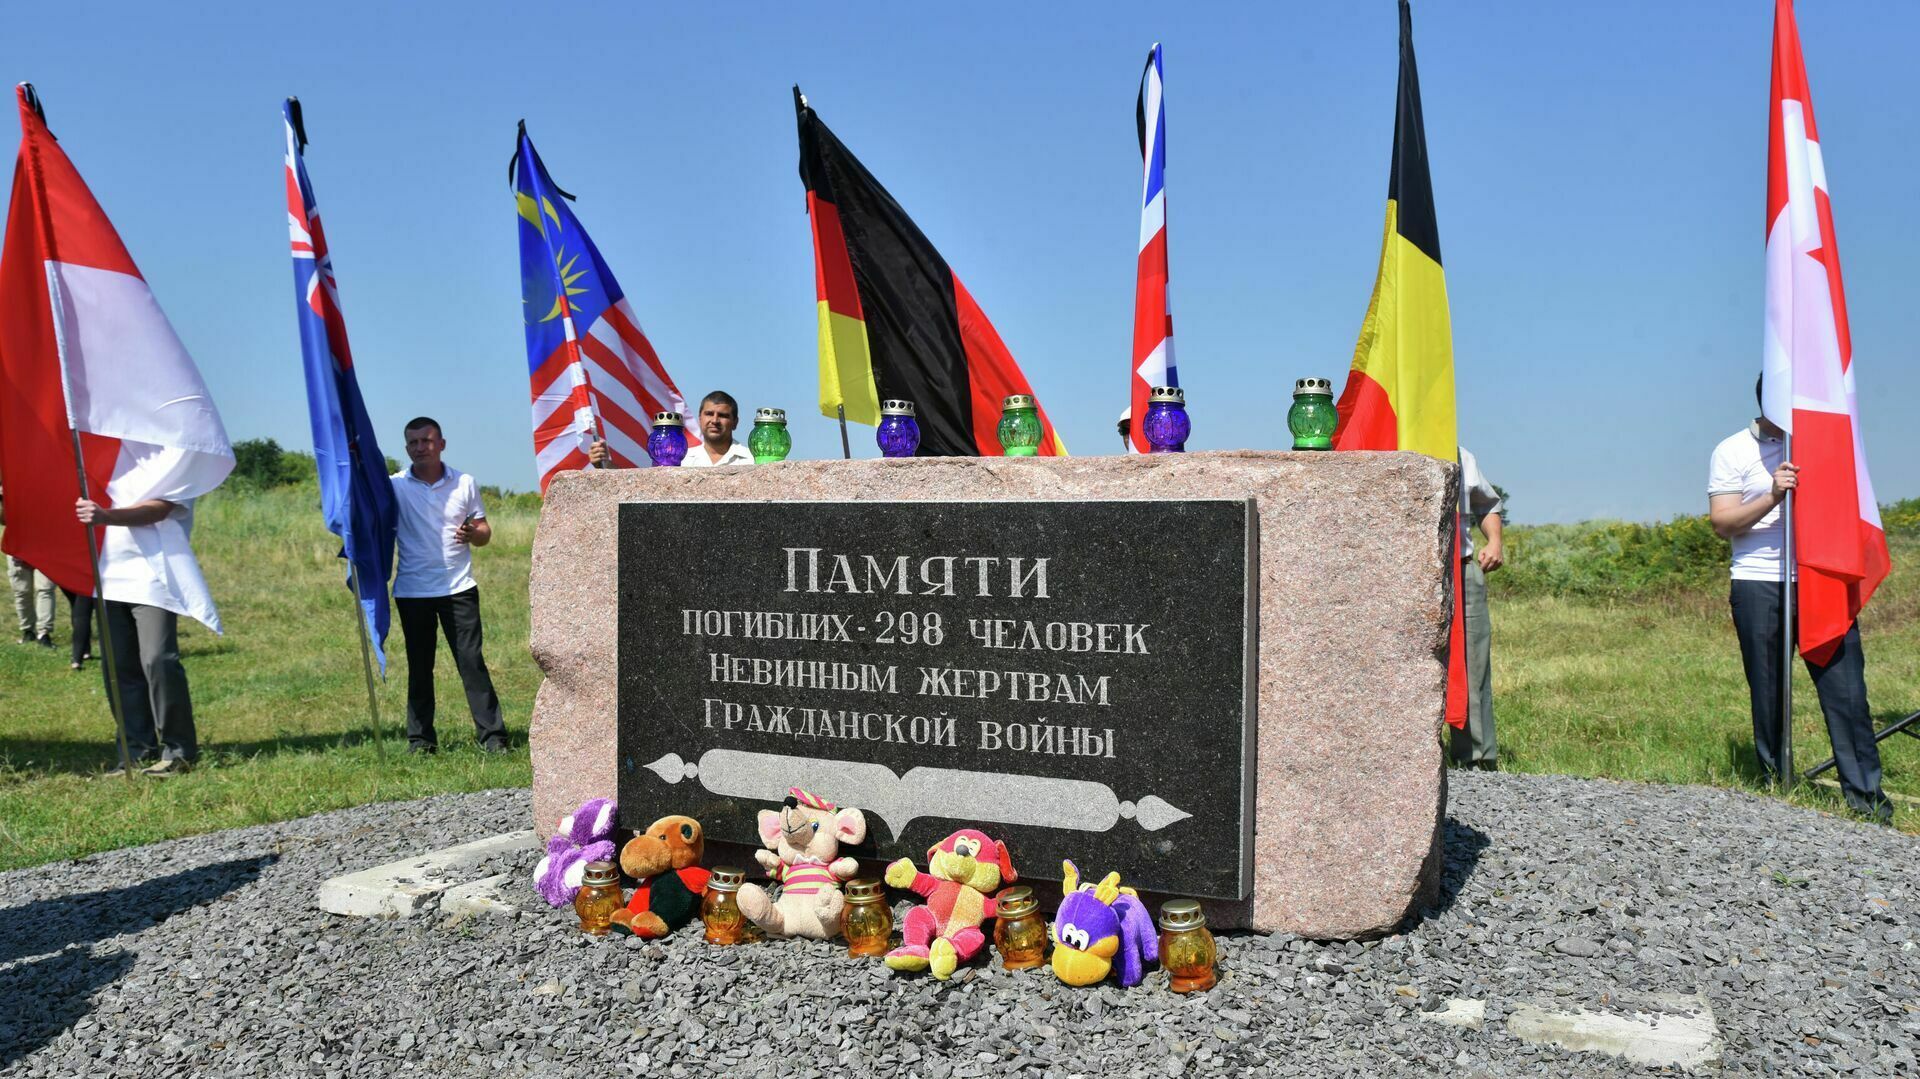 The verdict of the Hague court in the MH17 case: why three were convicted, and the fourth is innocent